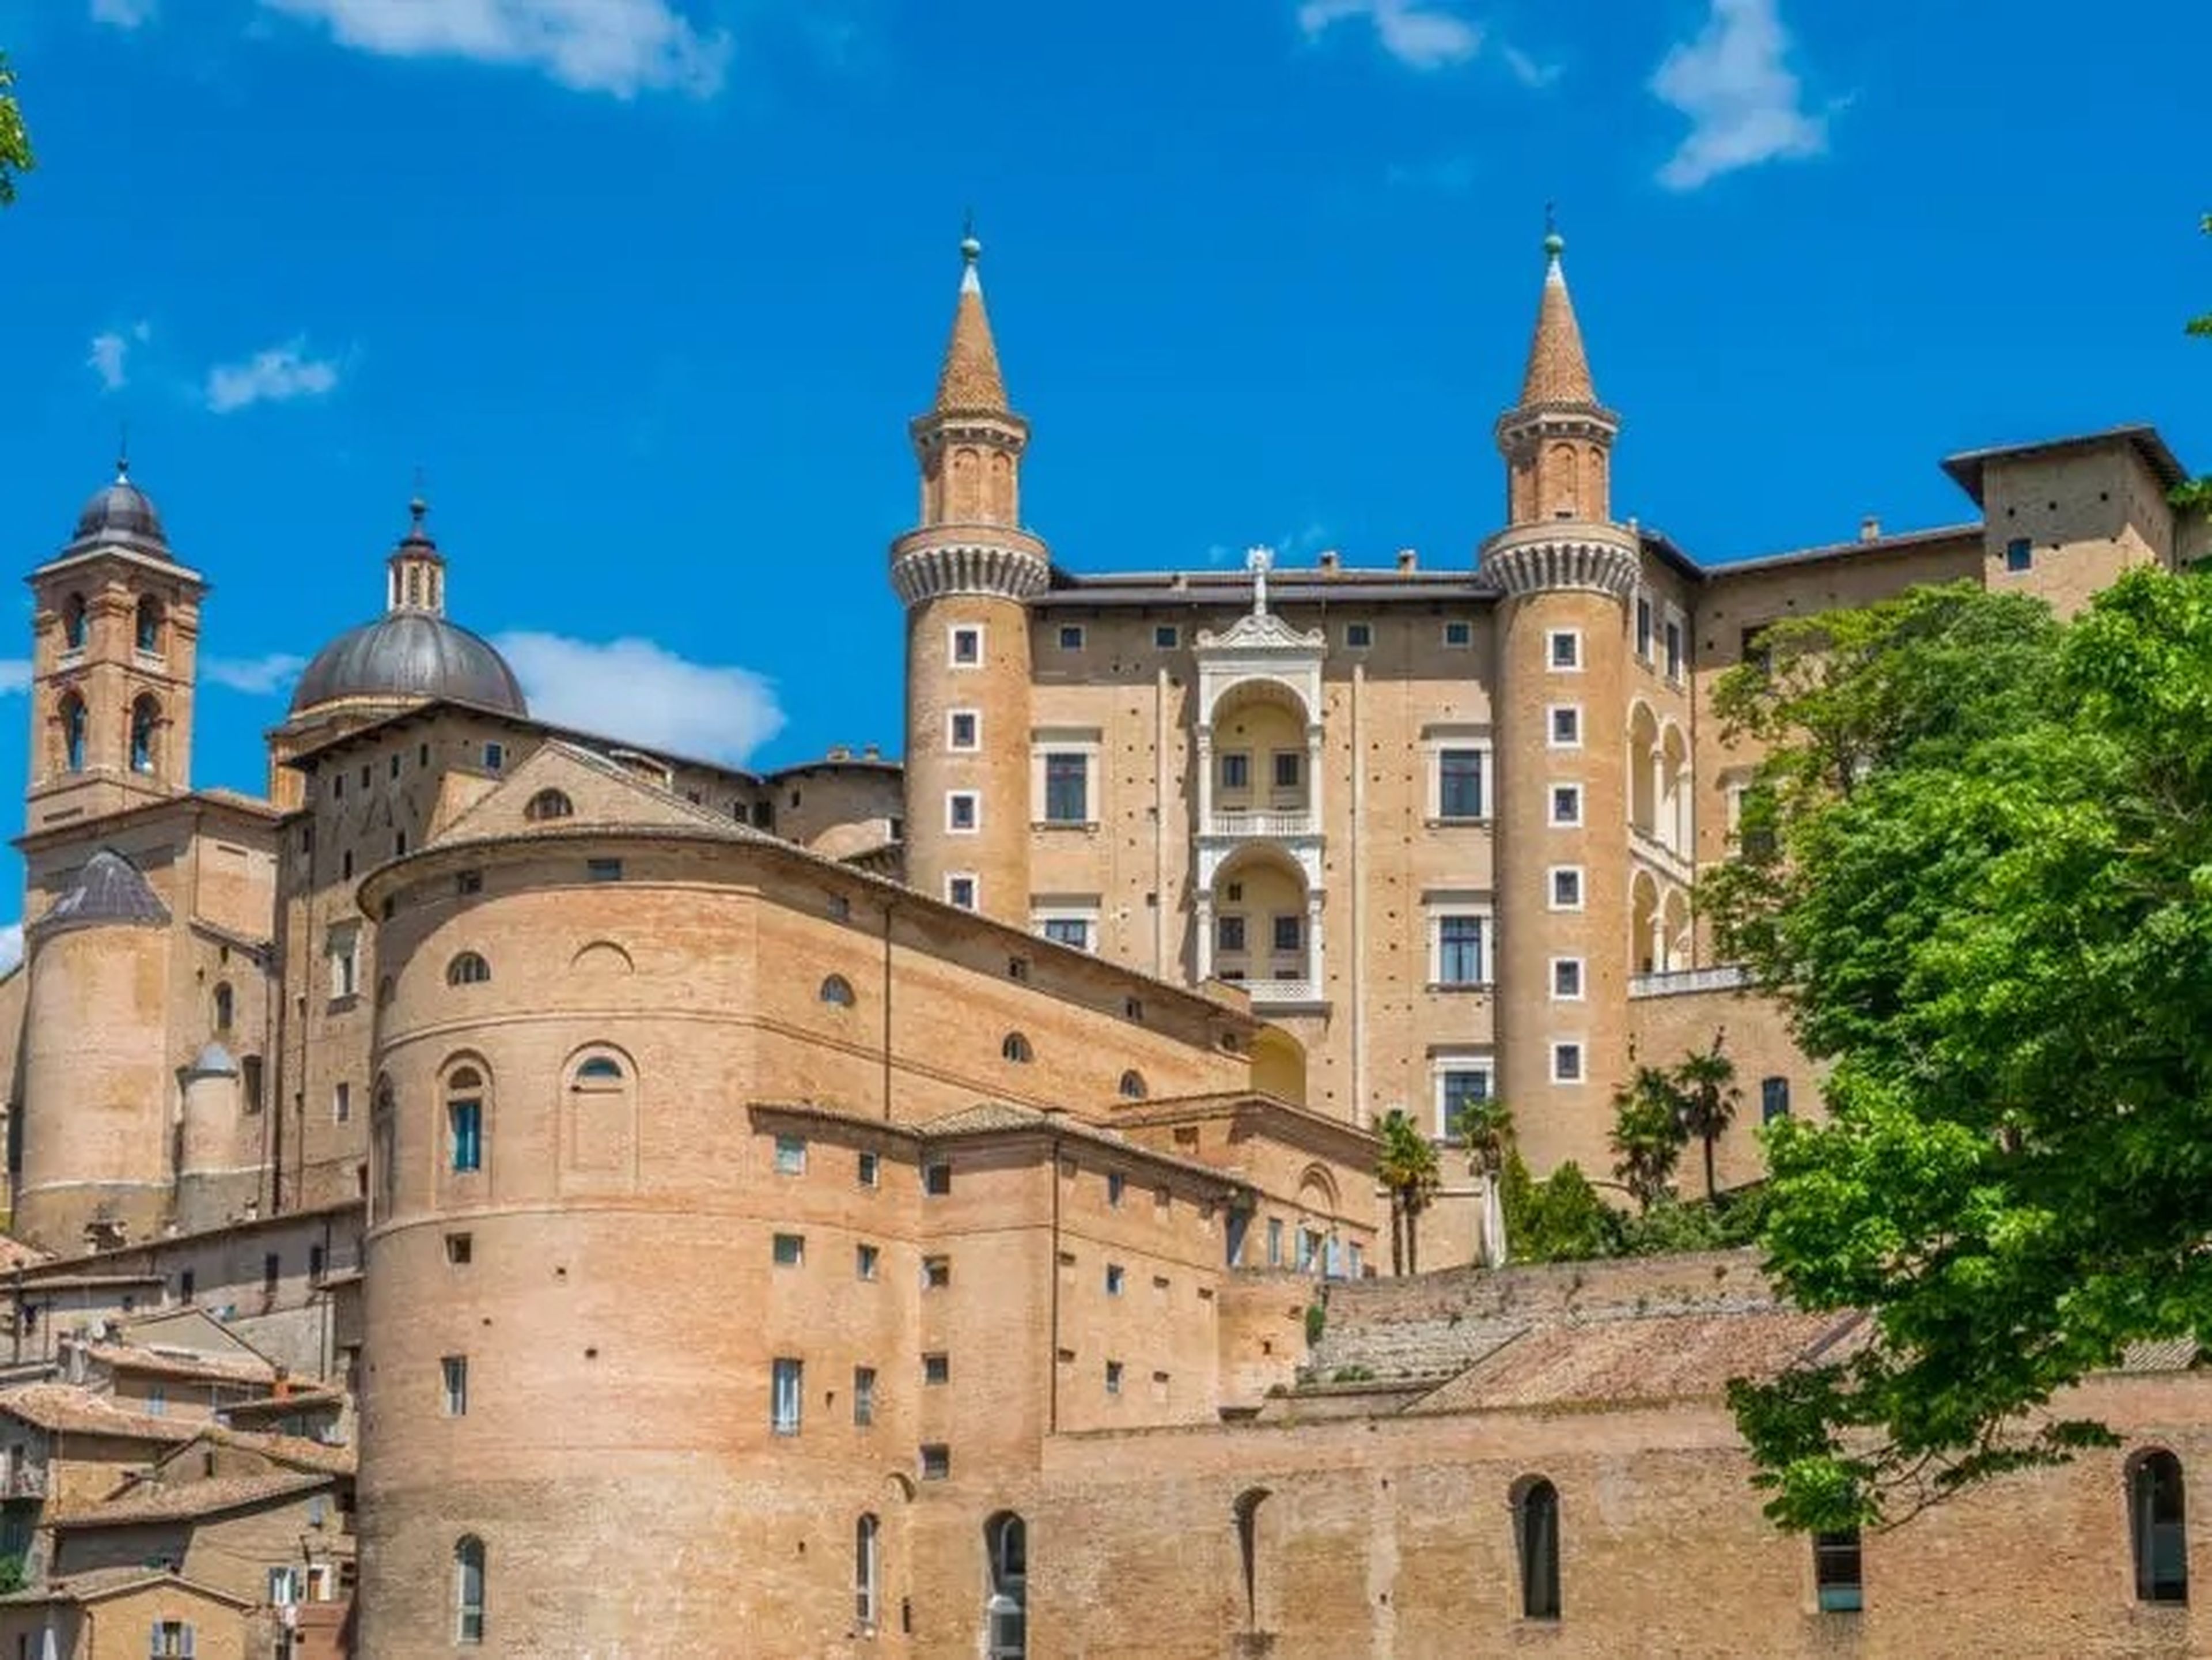 Buildings that look like castles in Urbino, Italy. The sky is blue, and there are trees on each side of the building.